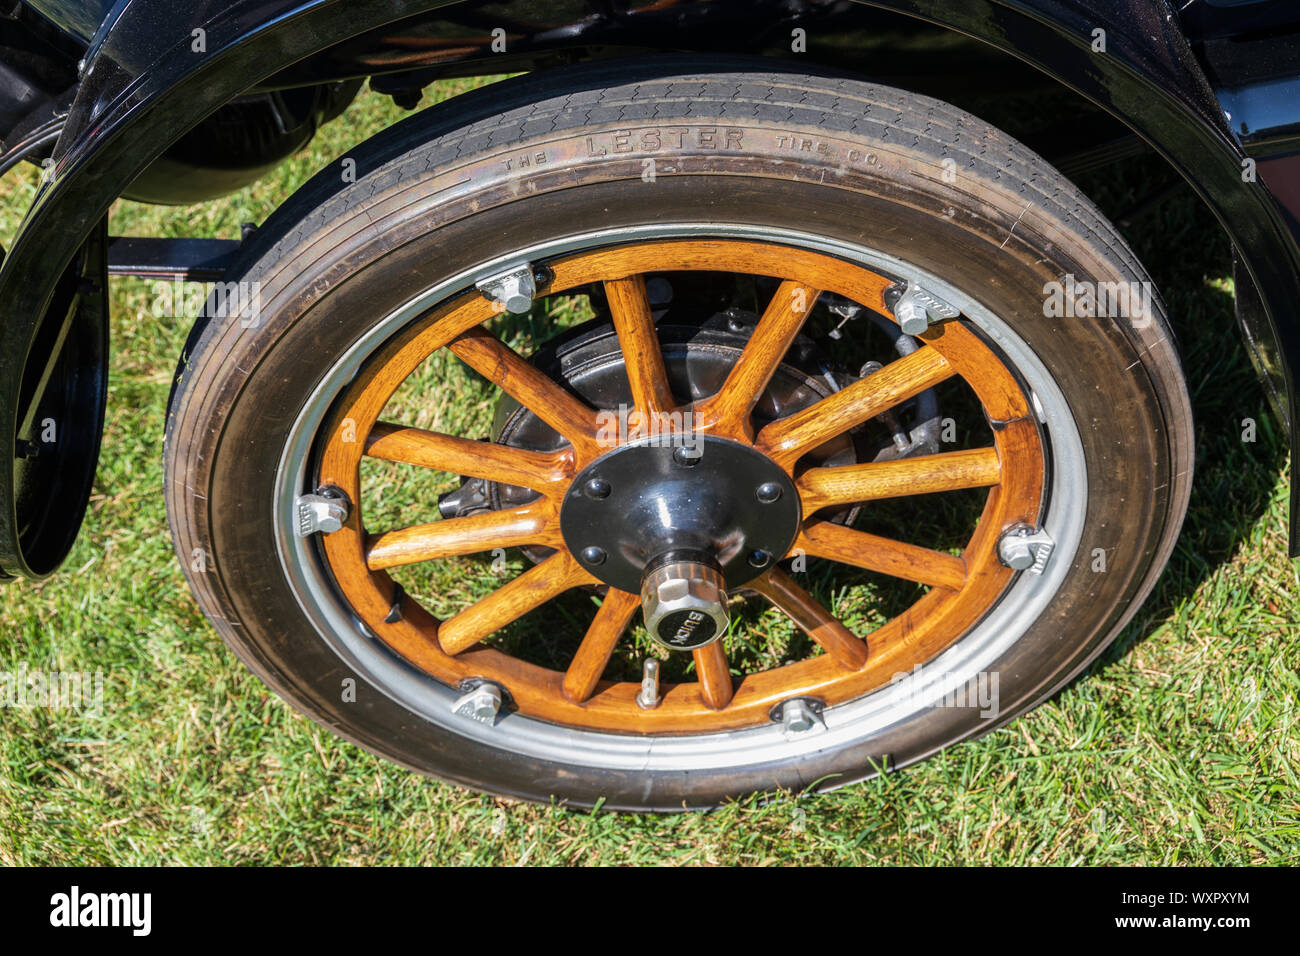 HICKORY, NC, USA-7 SEPT 2019: Wood spoked wheel of 1915 Buick C-25. Tire is from Lester Tire Co. Stock Photo